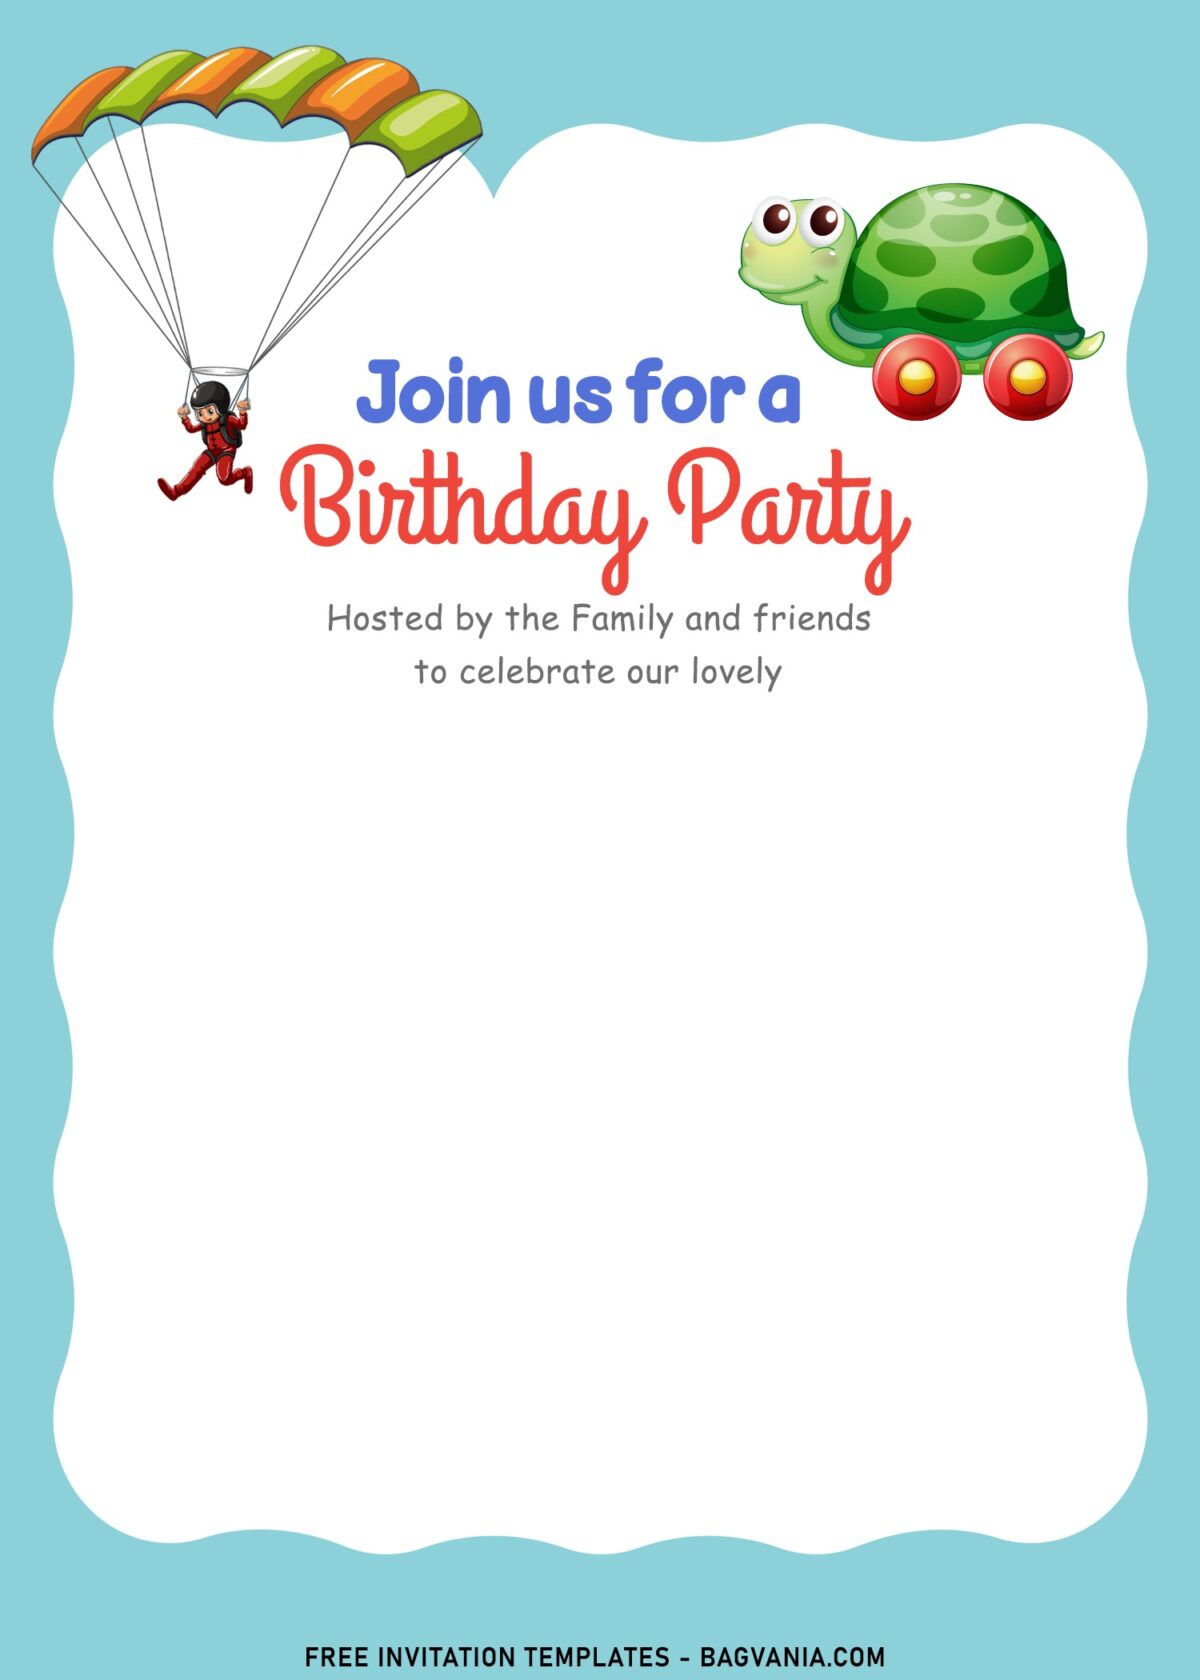 10+ Best And Cute Birthday Invitation Templates For Preschooler with cute turtle and